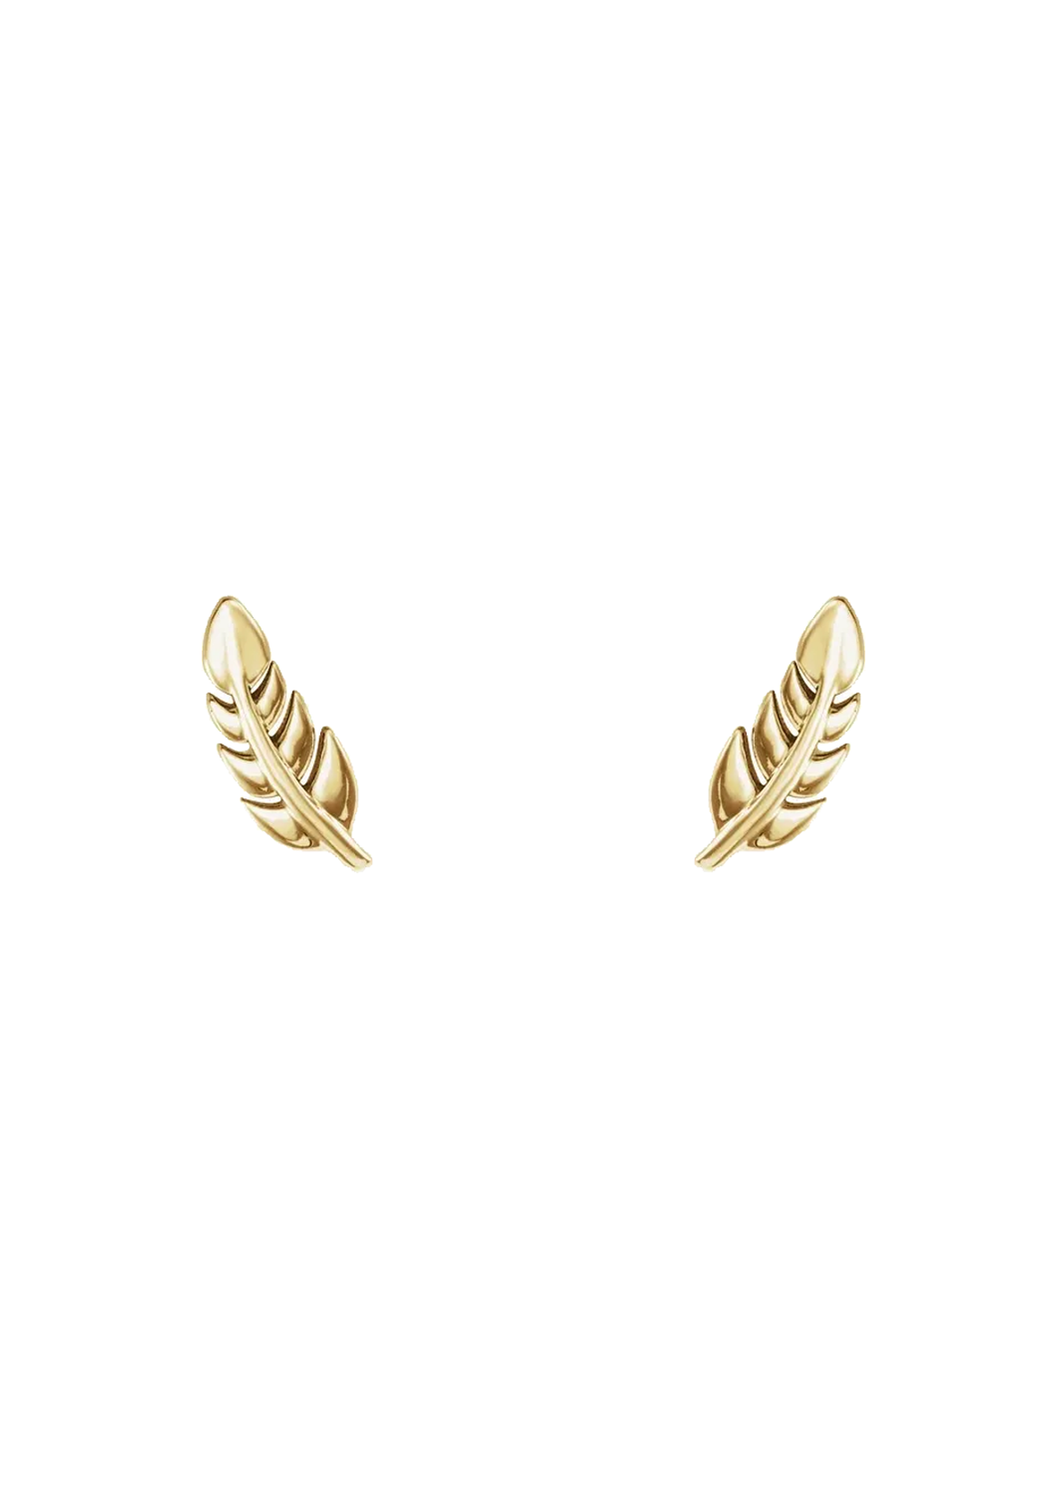 Earrings | Shop Studs, Hoops, Dangles, Drop and More — Oster